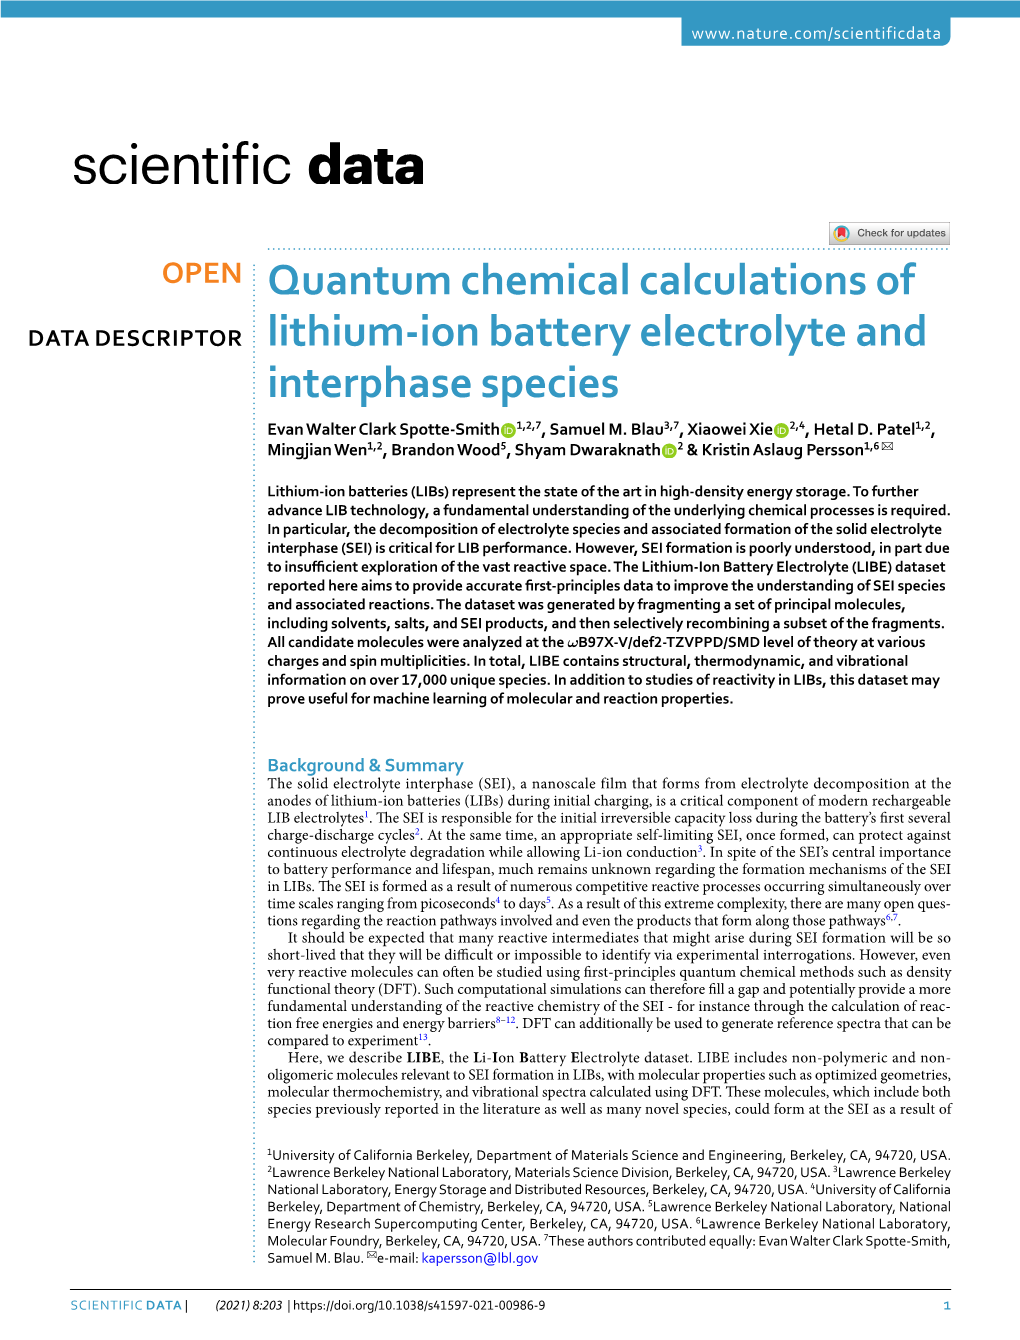 Quantum Chemical Calculations of Lithium-Ion Battery Electrolyte and Interphase Species